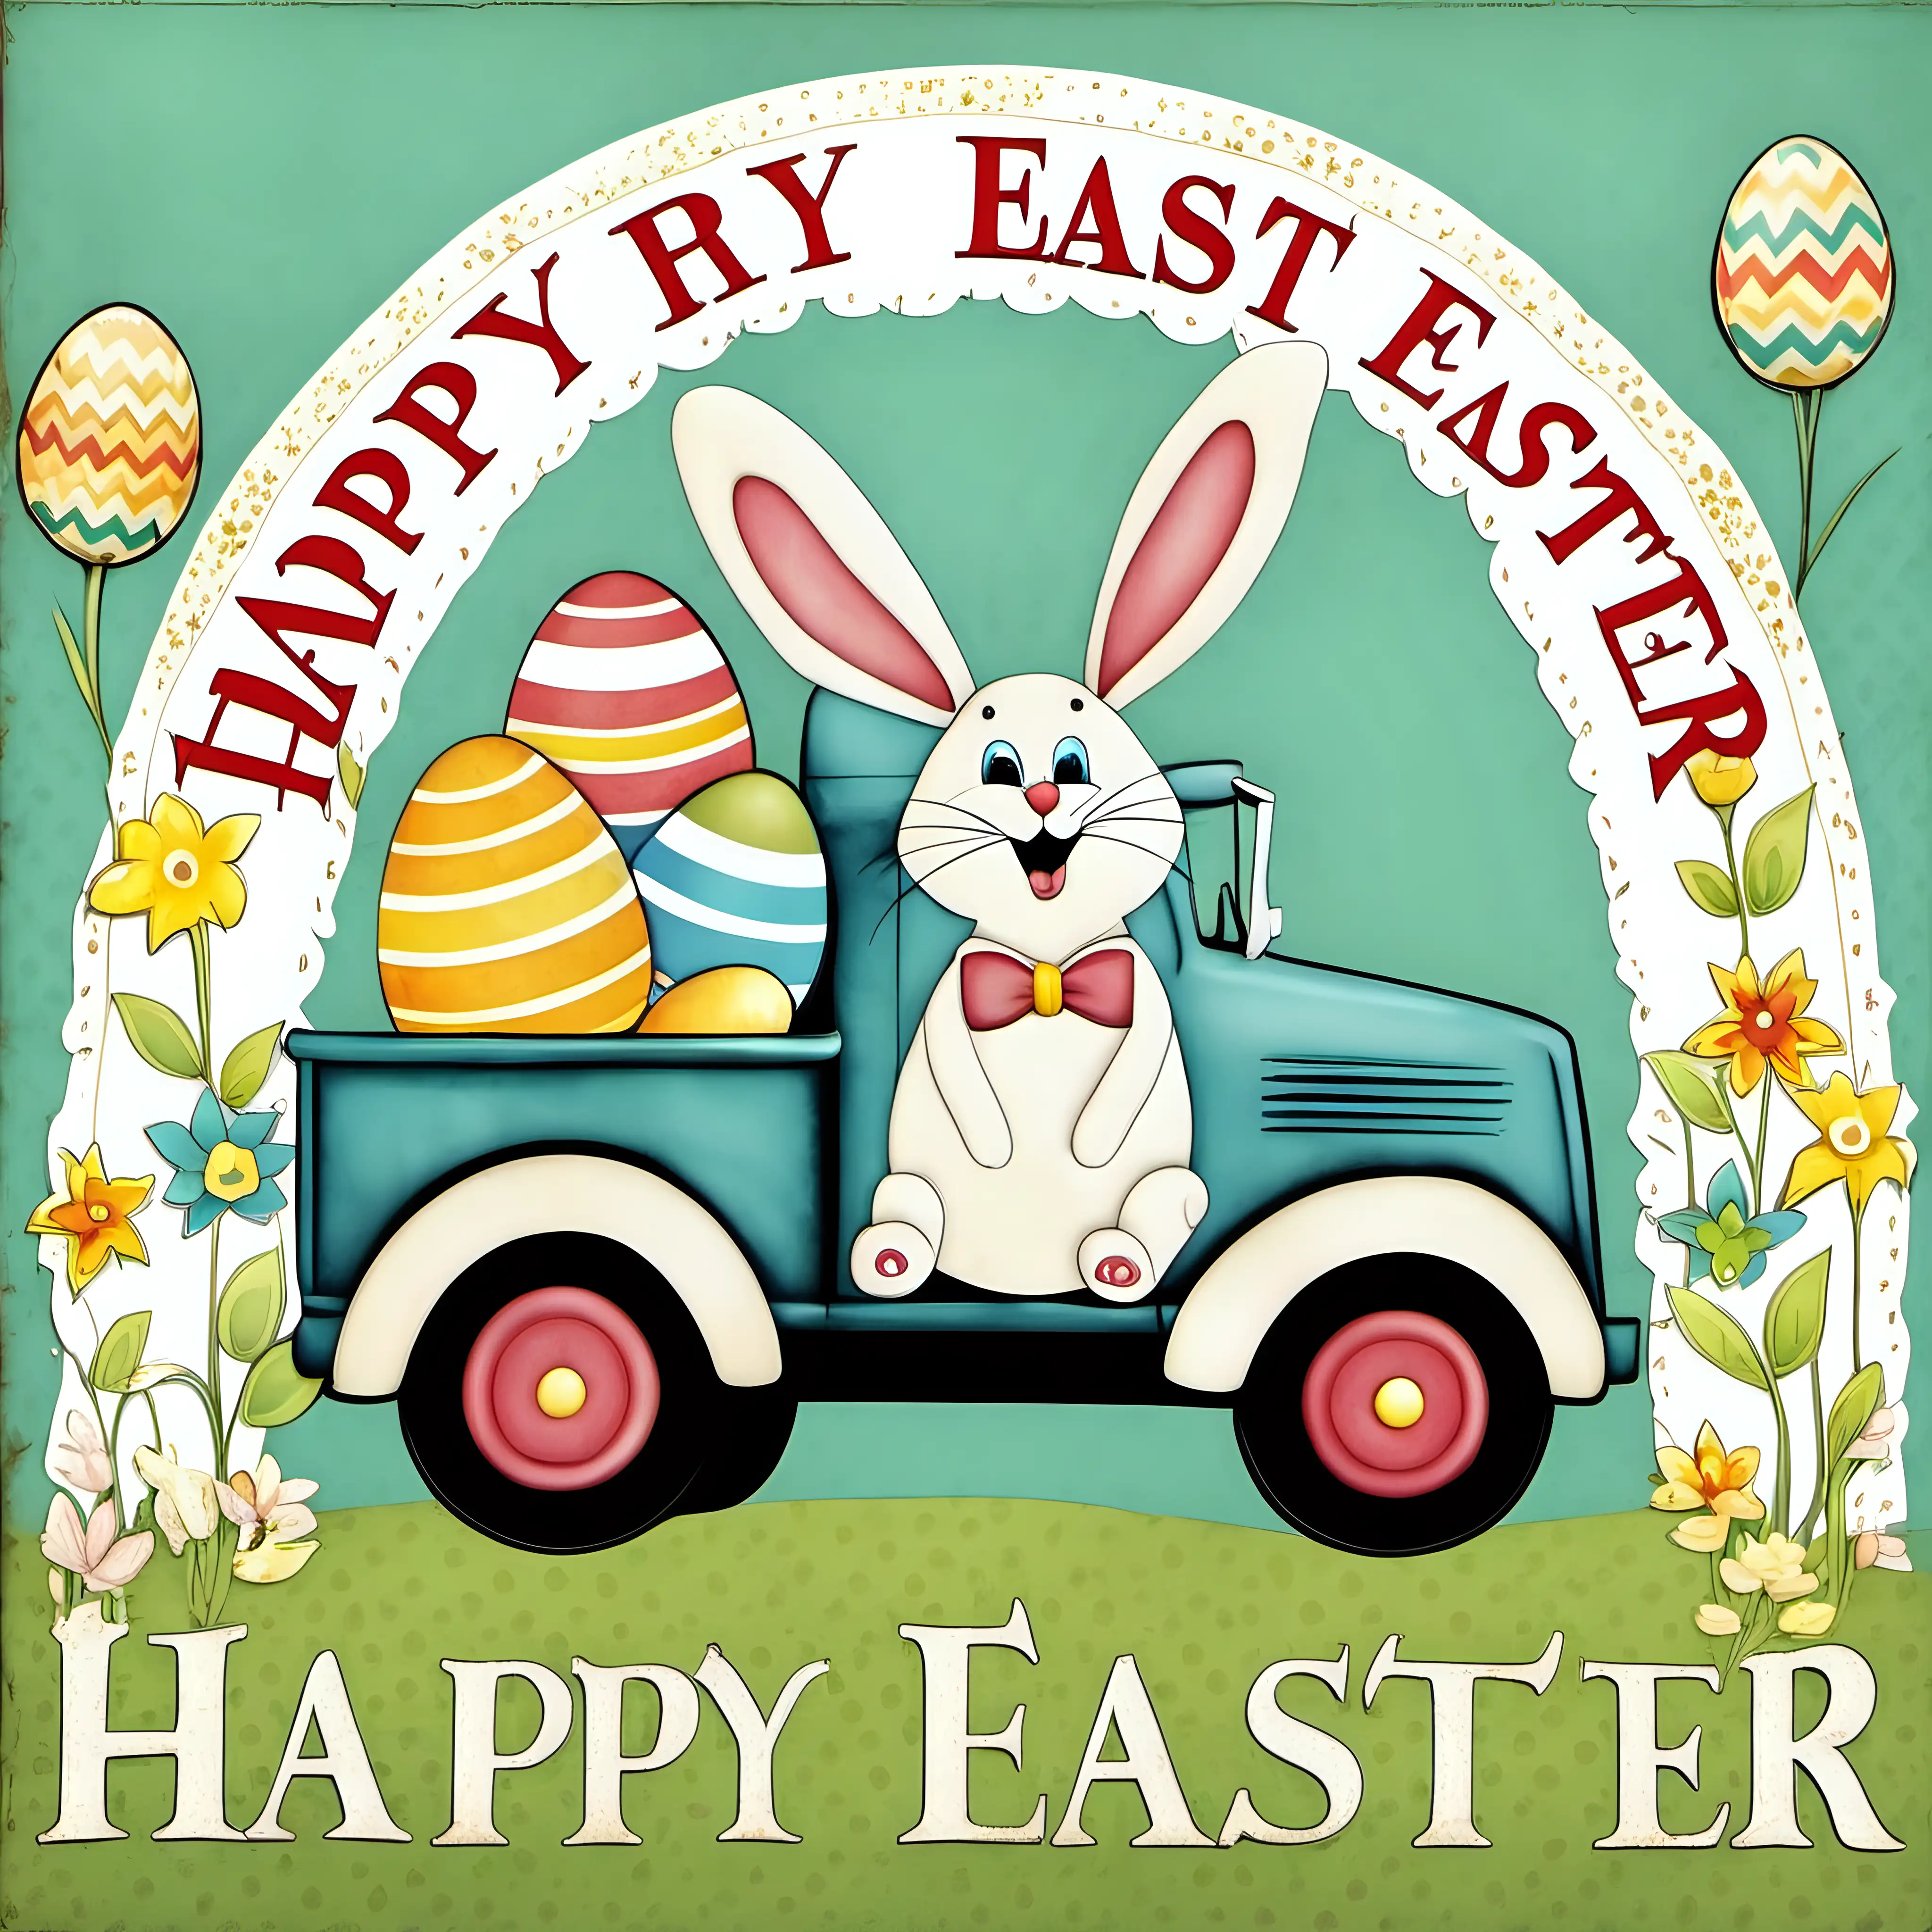 HAPPY EASTER, ARCHED WORDS, EASTER RABBIT, TRUCK